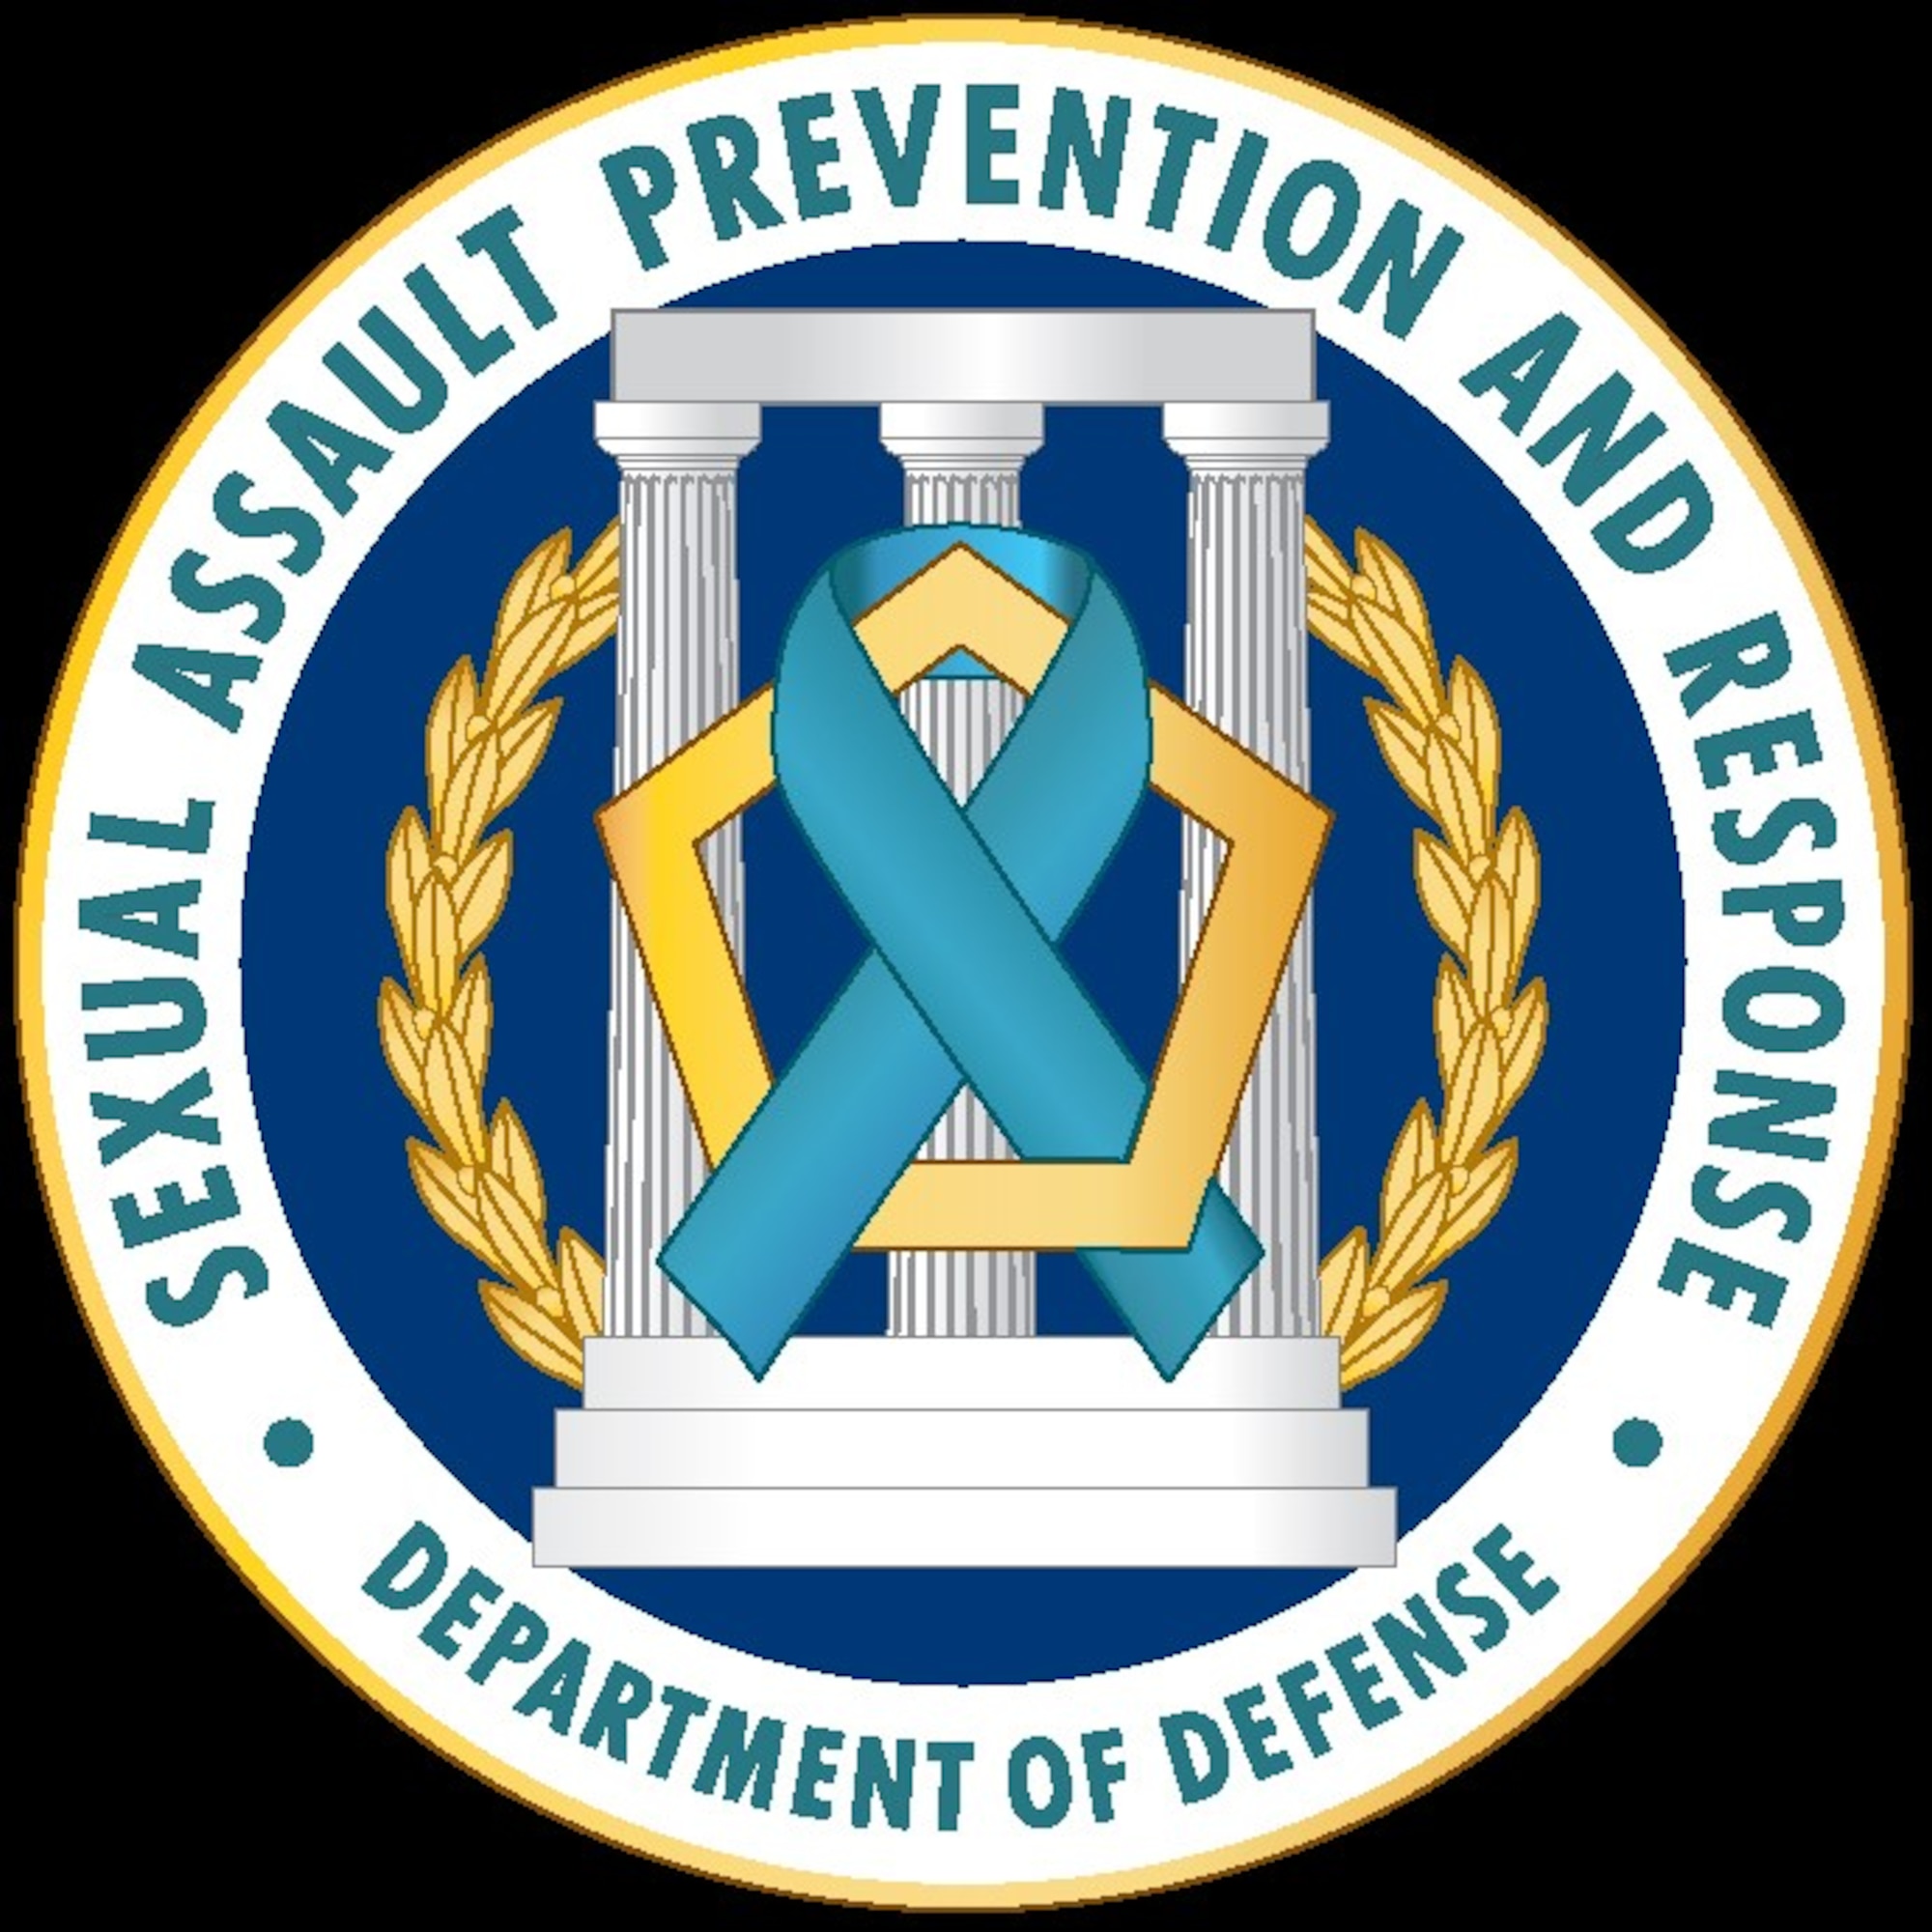 The Sexual Assault Prevention Response office at Arnold Air Force Base, Tenn., will host a number of events throughout April to bring attention to Sexual Assault Awareness and Prevention Month. Each April is Sexual Assault Awareness and Prevention Month. It was started to raise awareness about sexual assault and educate the public on ways to prevent it. (Department of Defense graphic)